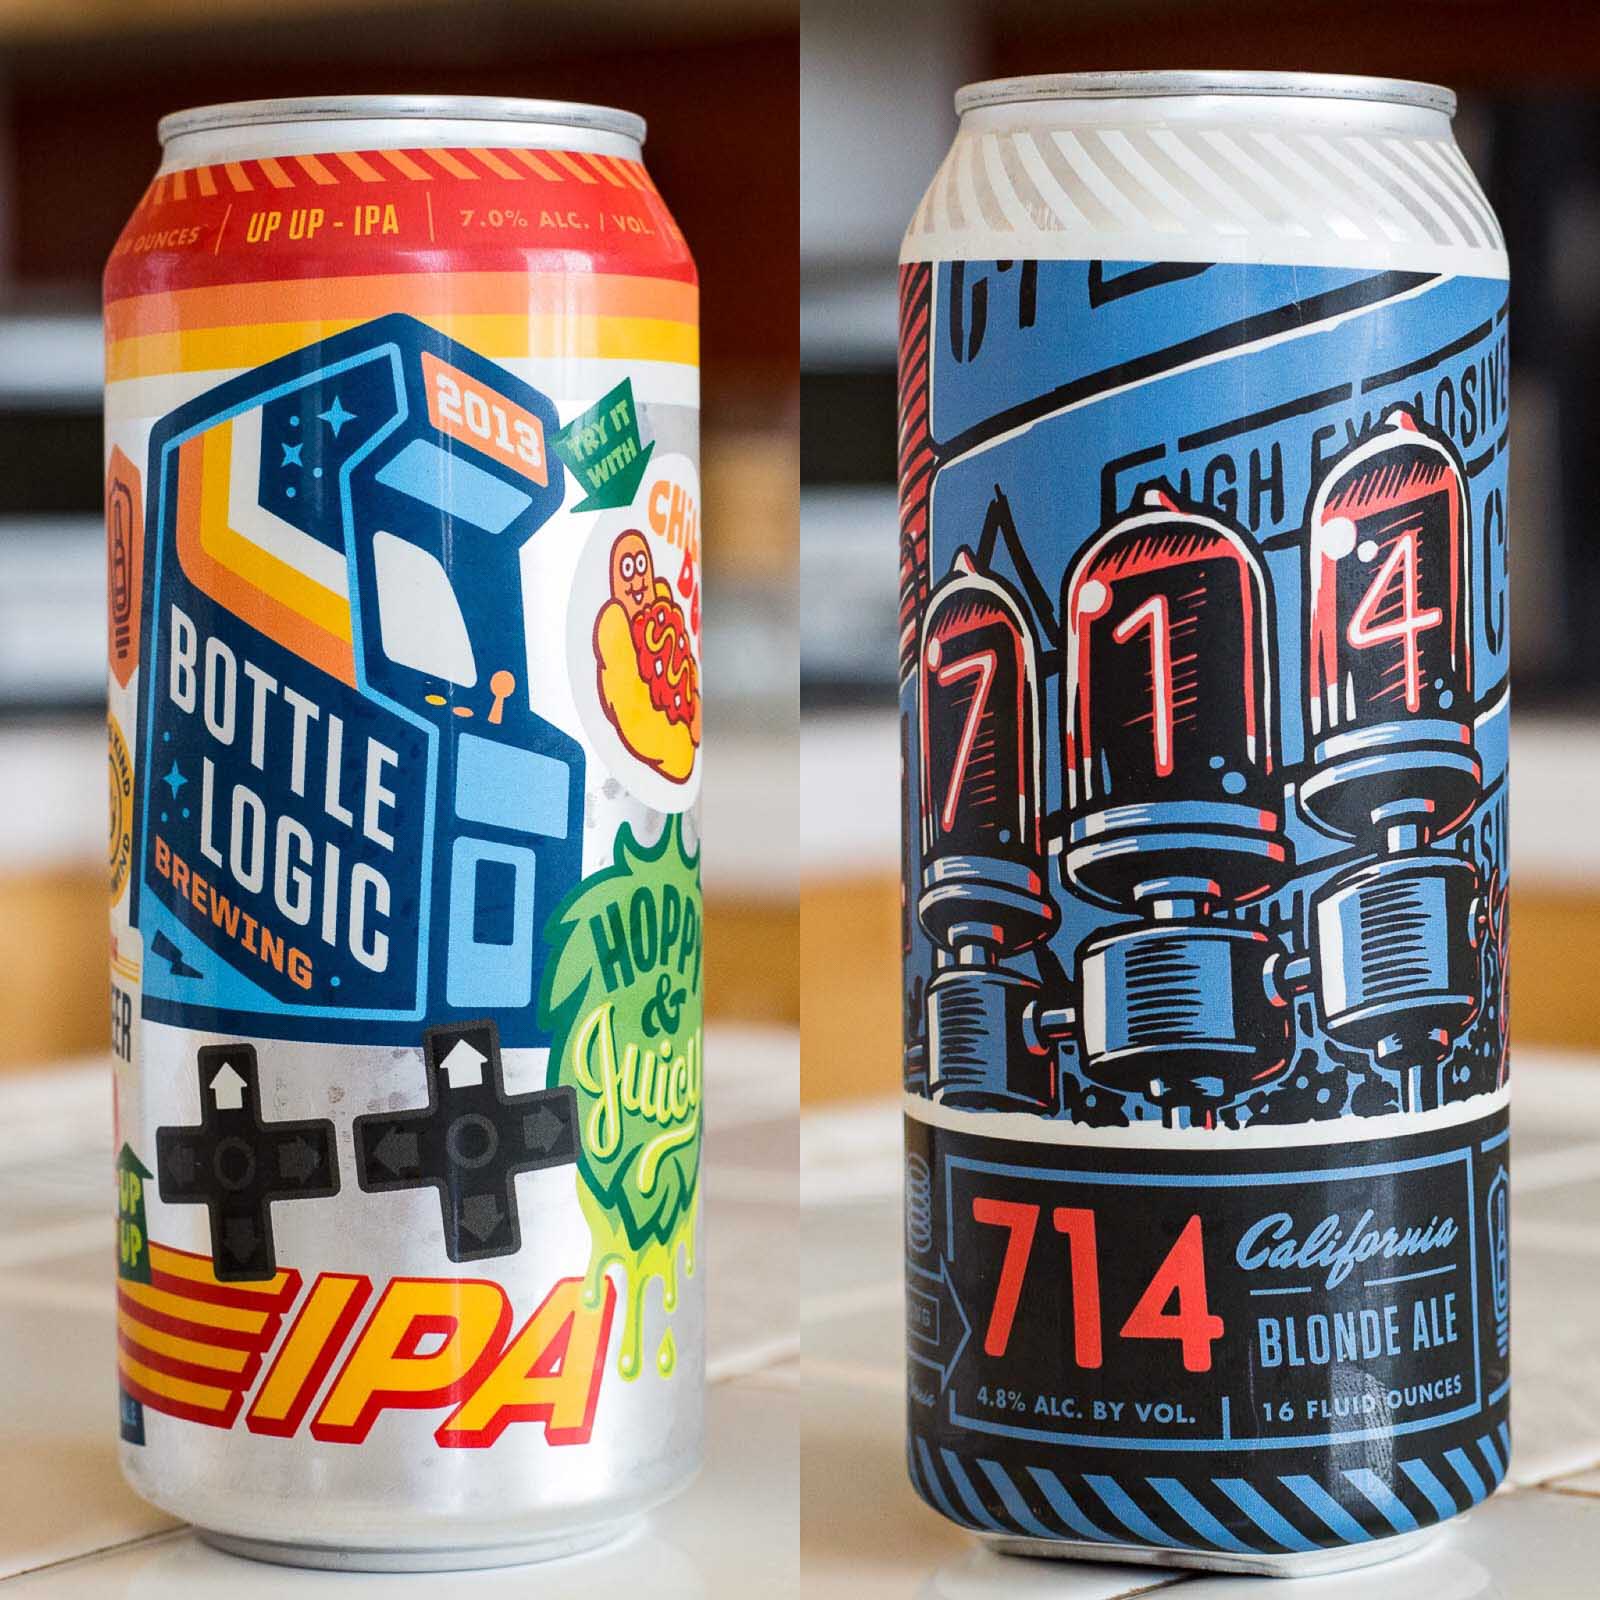 Bottle Logic Brewing 714 and Up Up